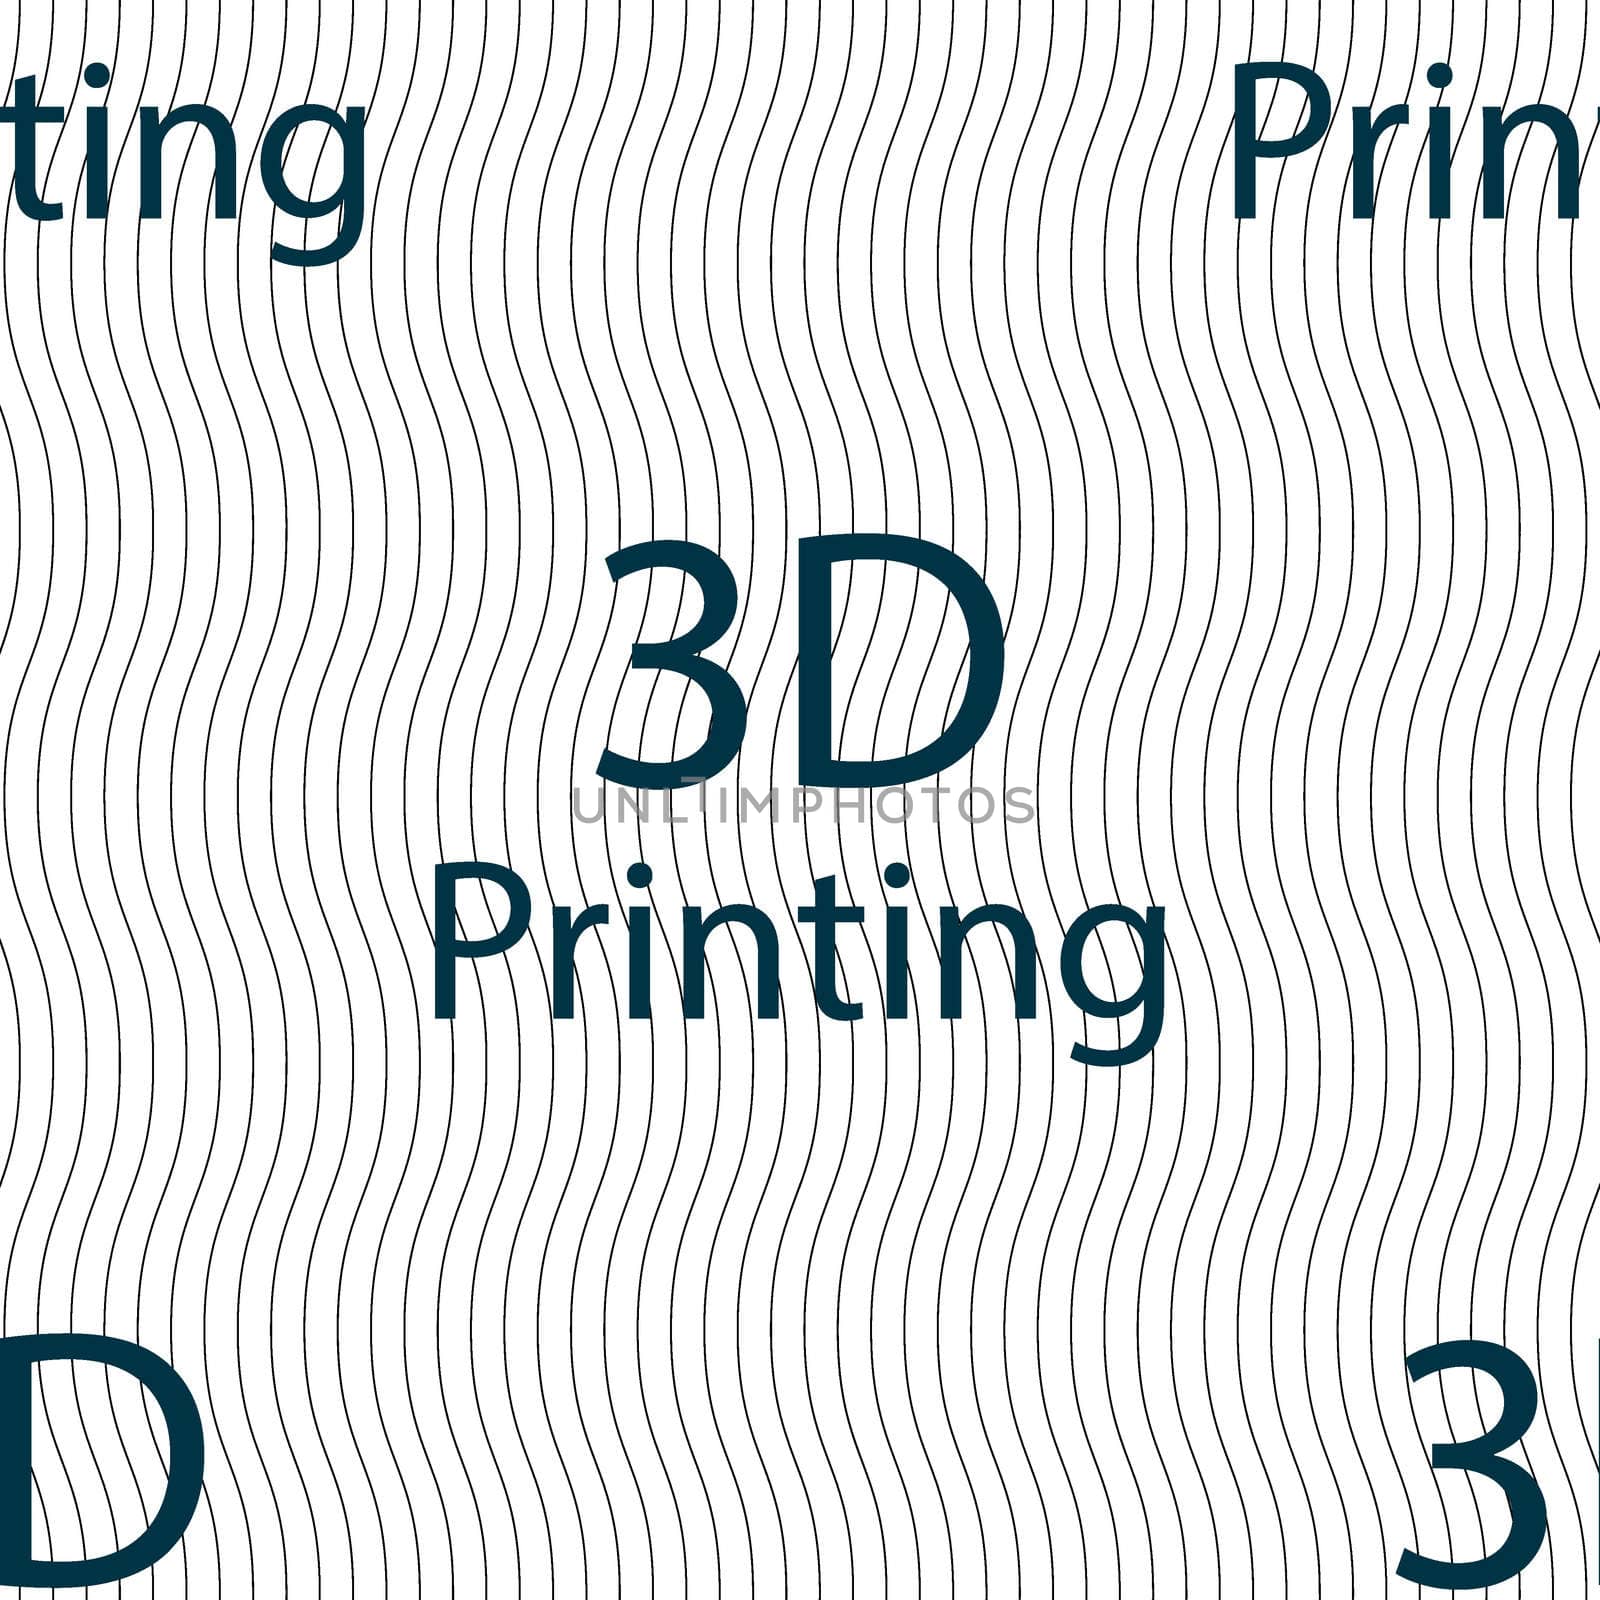 3D Print sign icon. 3d-Printing symbol. Seamless pattern with geometric texture. illustration